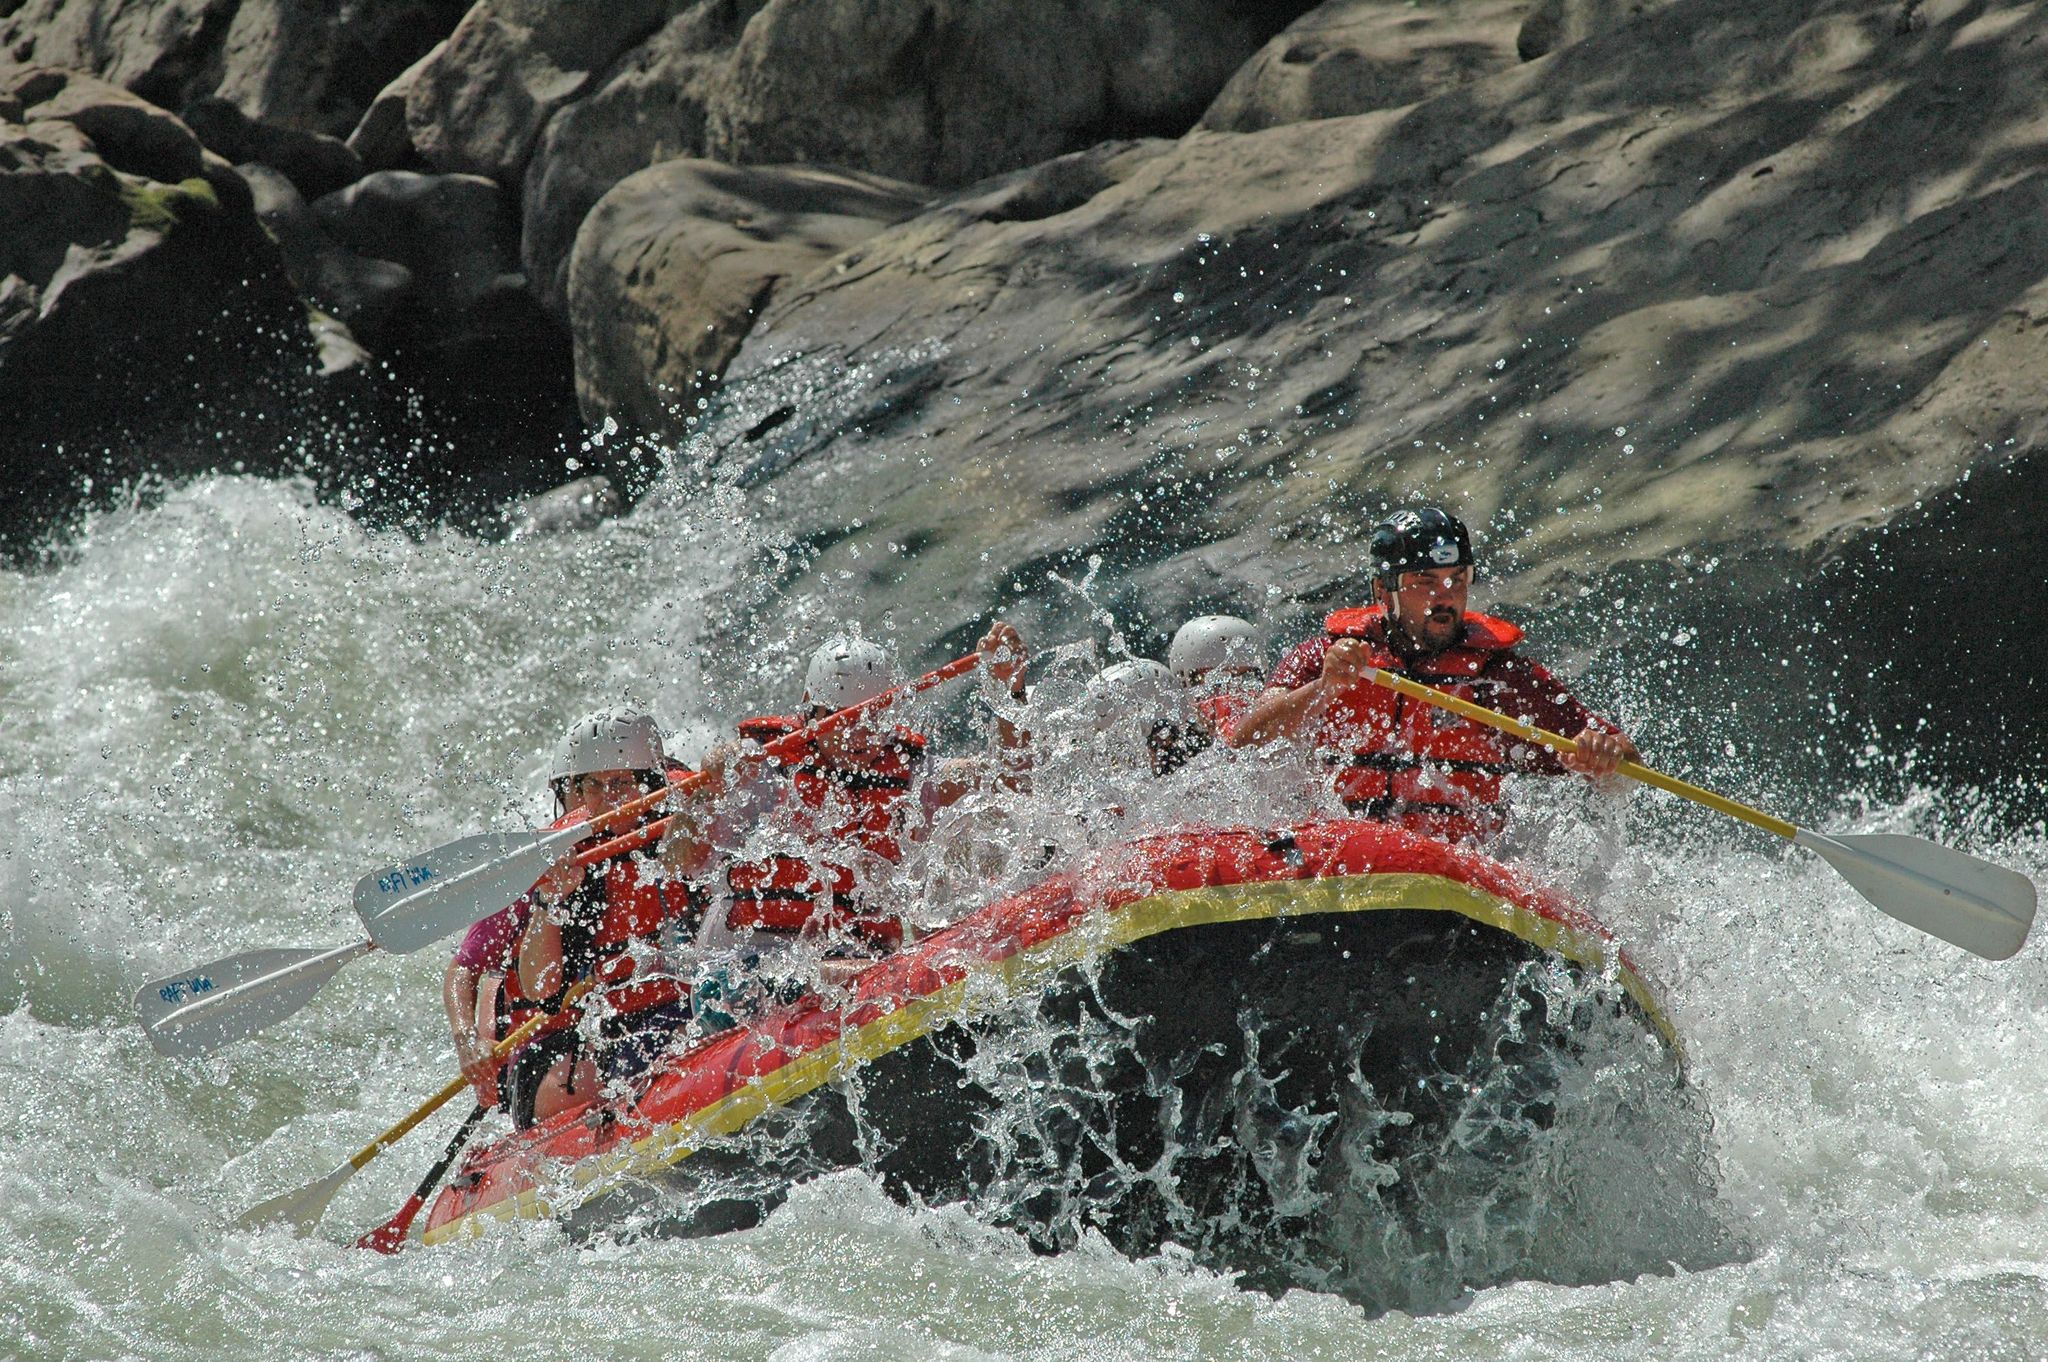 Gauley River is a popular whitewater river in the fall